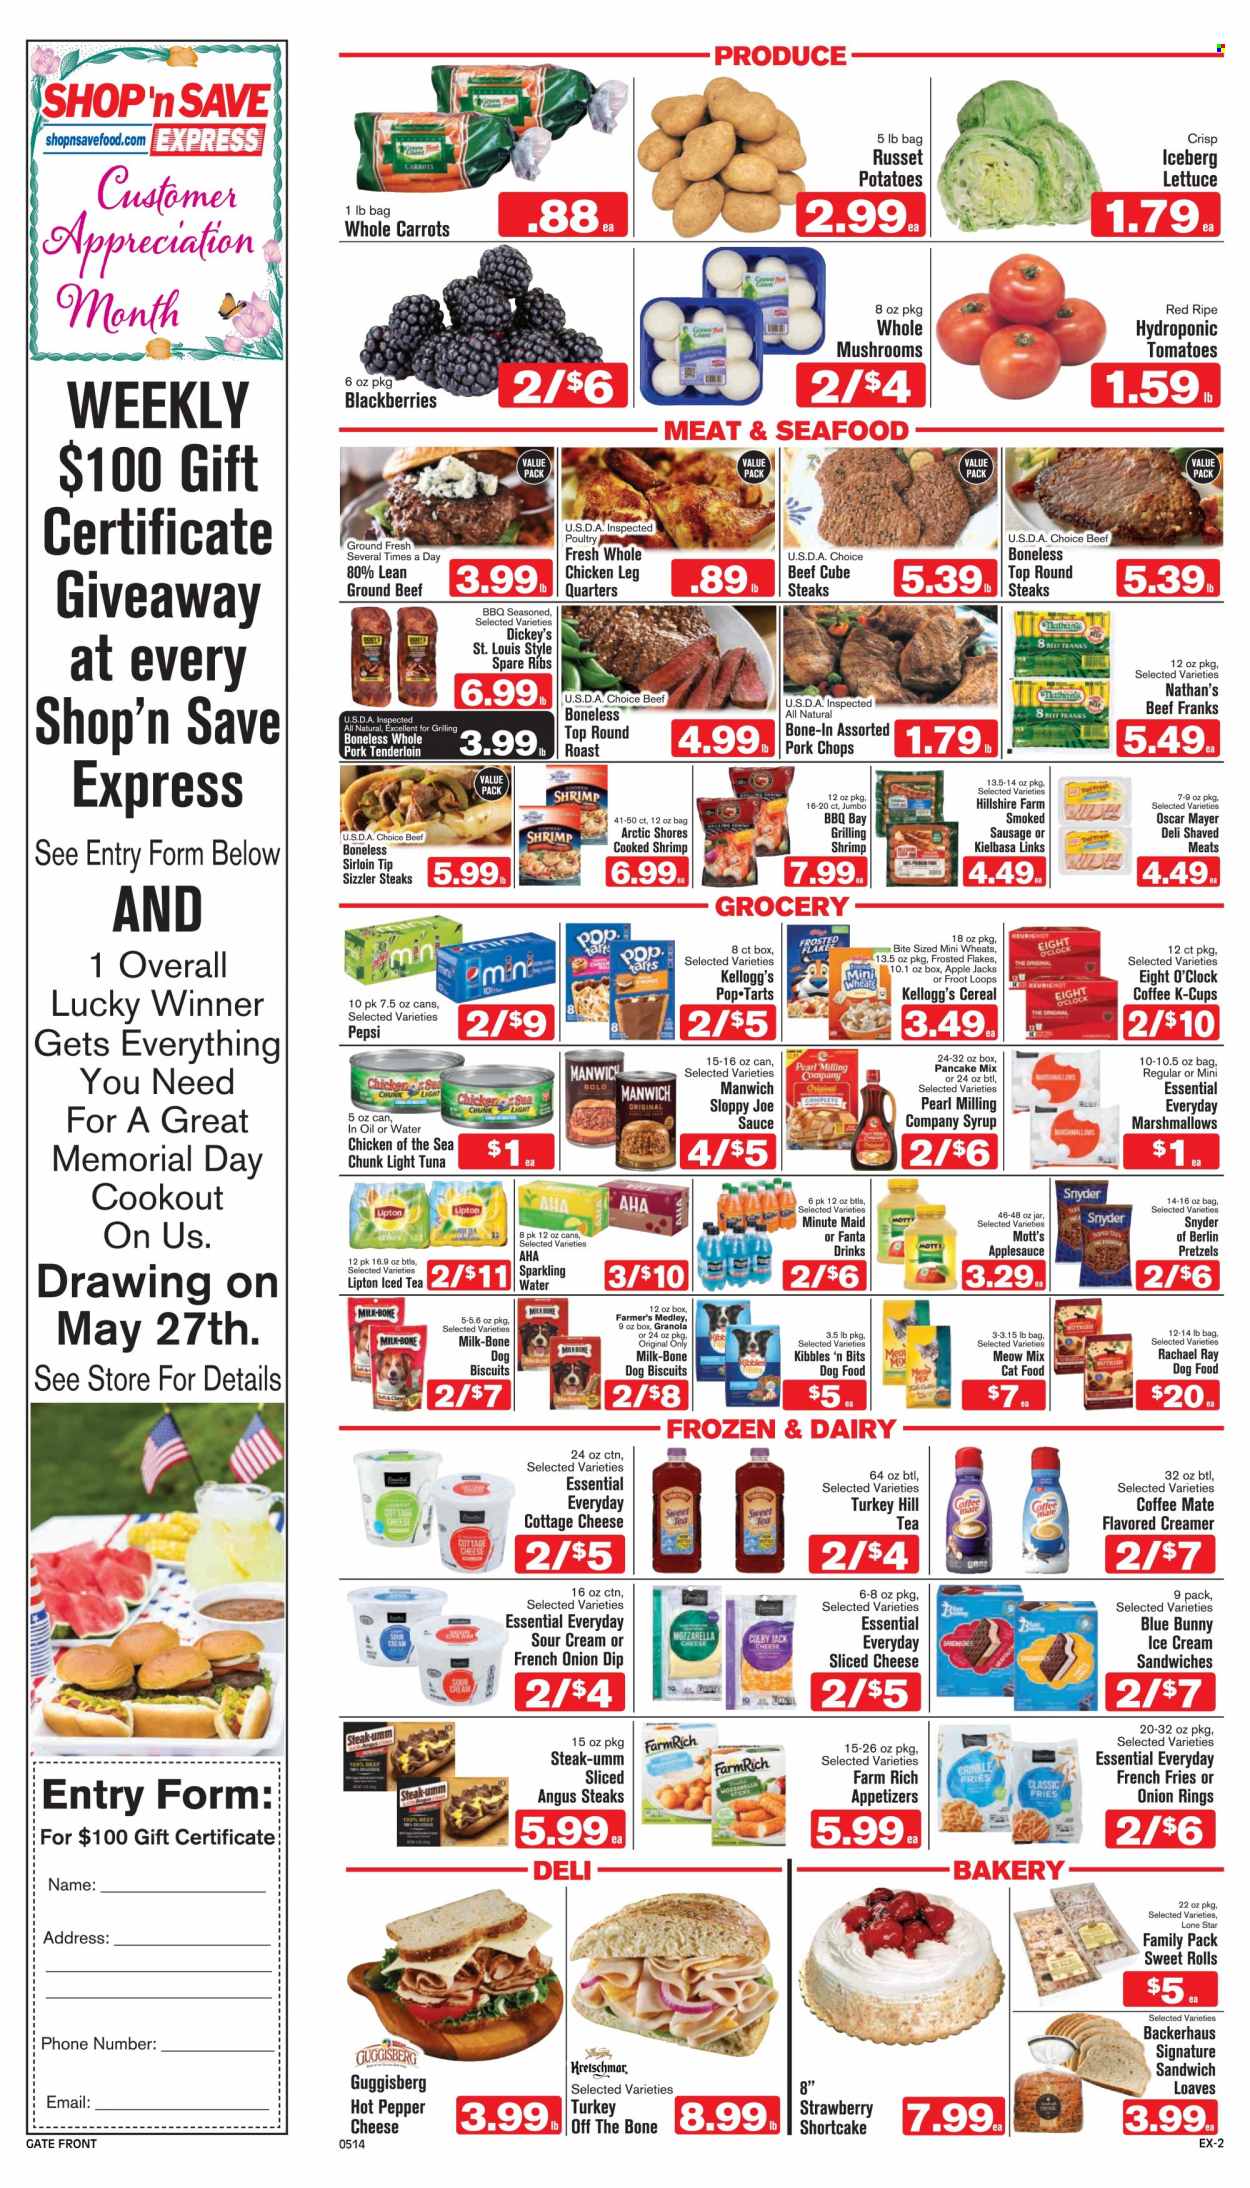 thumbnail - Shop ‘n Save Express Flyer - 05/14/2022 - 05/20/2022 - Sales products - mushrooms, pretzels, sweet rolls, carrots, russet potatoes, tomatoes, potatoes, lettuce, blackberries, Mott's, chicken legs, beef meat, ground beef, steak, round roast, pork chops, pork meat, pork tenderloin, pork spare ribs, shrimps, Arctic Shores, onion rings, sauce, pancakes, Hillshire Farm, Oscar Mayer, smoked sausage, kielbasa, Colby cheese, cottage cheese, mozzarella, sliced cheese, cheese, Coffee-Mate, milk, sour cream, creamer, dip, ice cream, ice cream sandwich, Blue Bunny, potato fries, french fries, crinkle fries, marshmallows, Kellogg's, light tuna, Chicken of the Sea, Manwich, cereals, granola, Frosted Flakes, apple sauce, syrup, Pepsi, Fanta, Lipton, ice tea, fruit punch, sparkling water, coffee capsules, K-Cups, Eight O'Clock, dog biscuits, Meow Mix, Nutrish. Page 2.